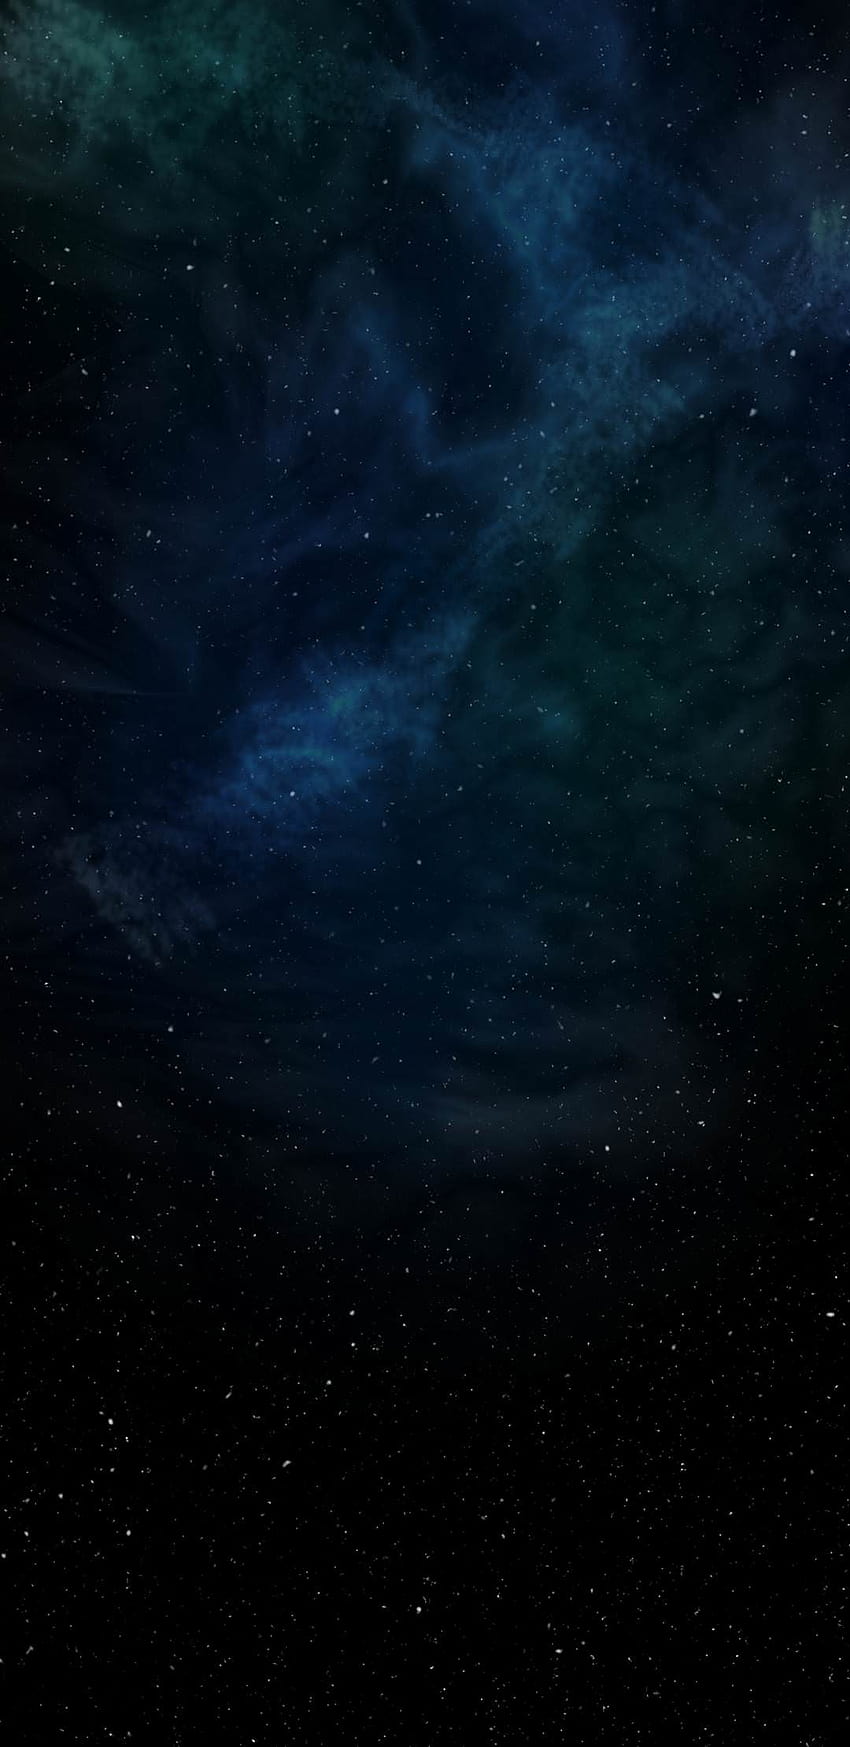 Just a share.. : GalaxyS8, oled reddit HD phone wallpaper